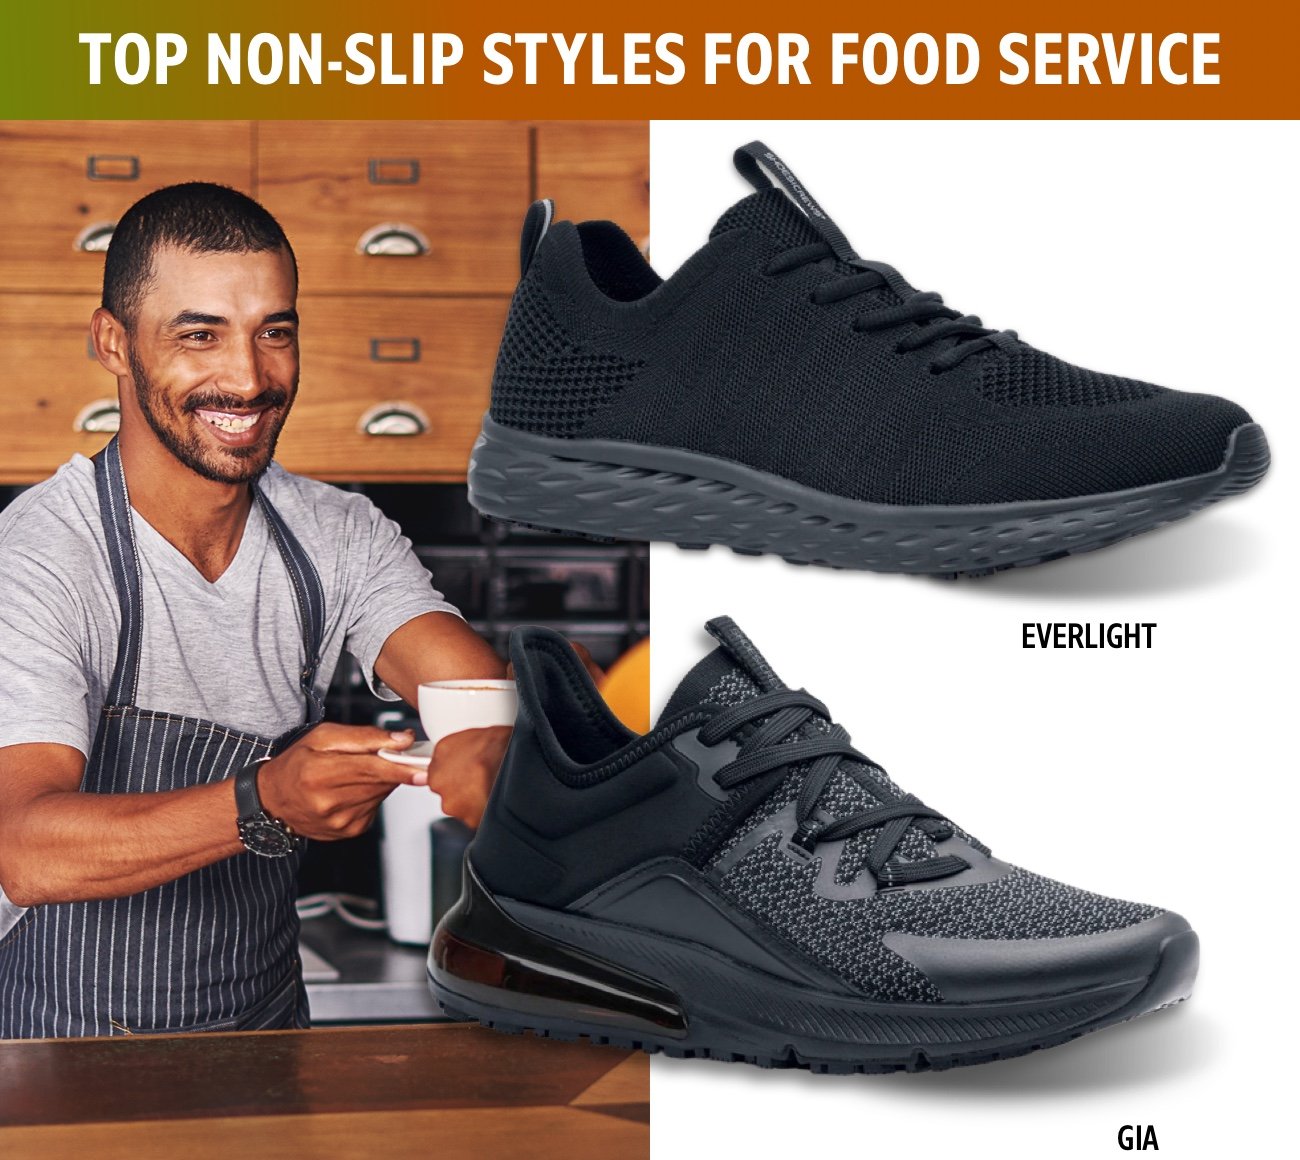 Top Non-Slip styles for food service